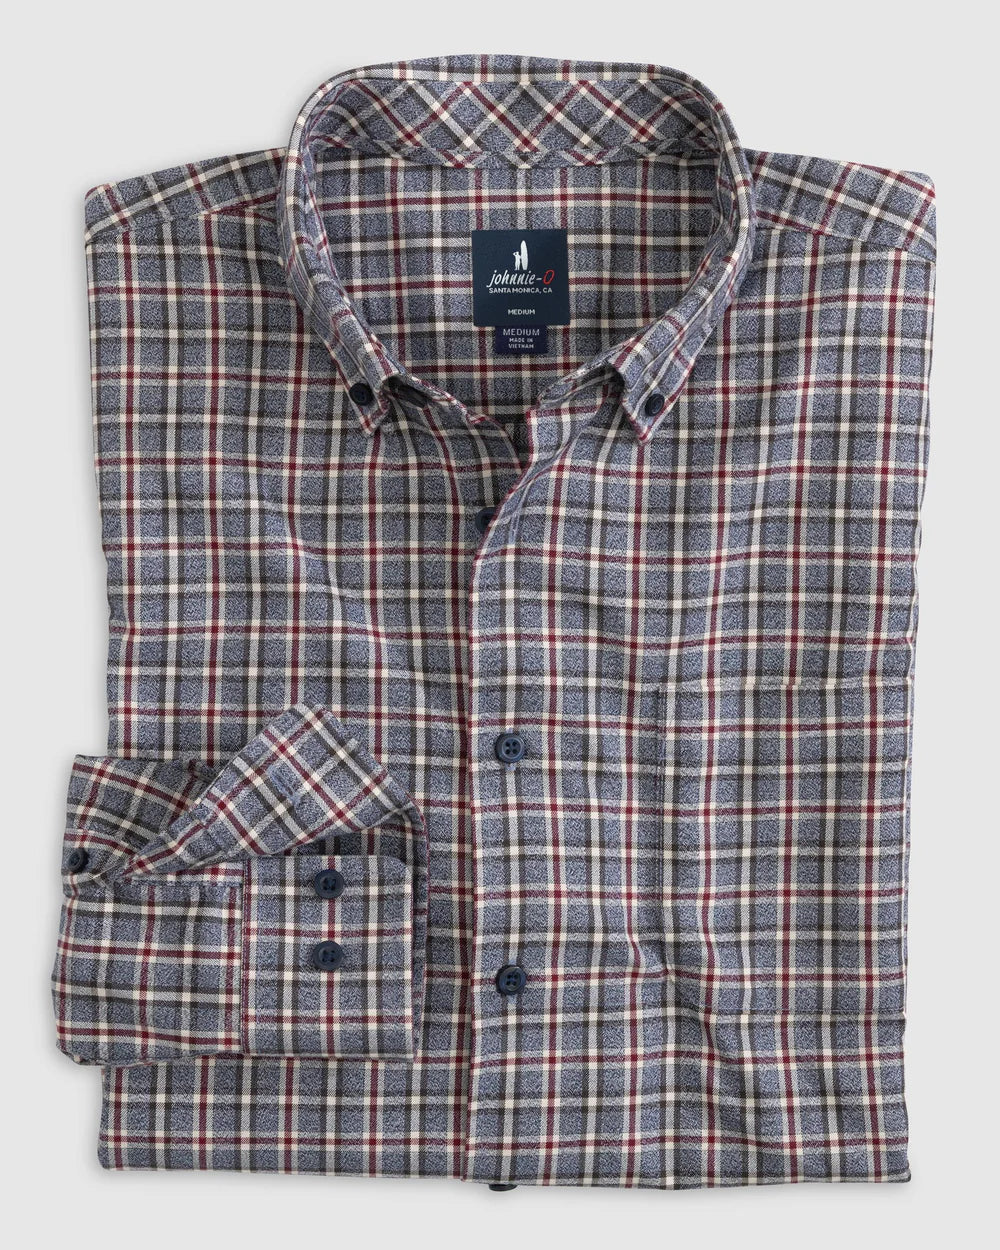 Johnnie-O Celo Tucked Button Up Shirt in Wake